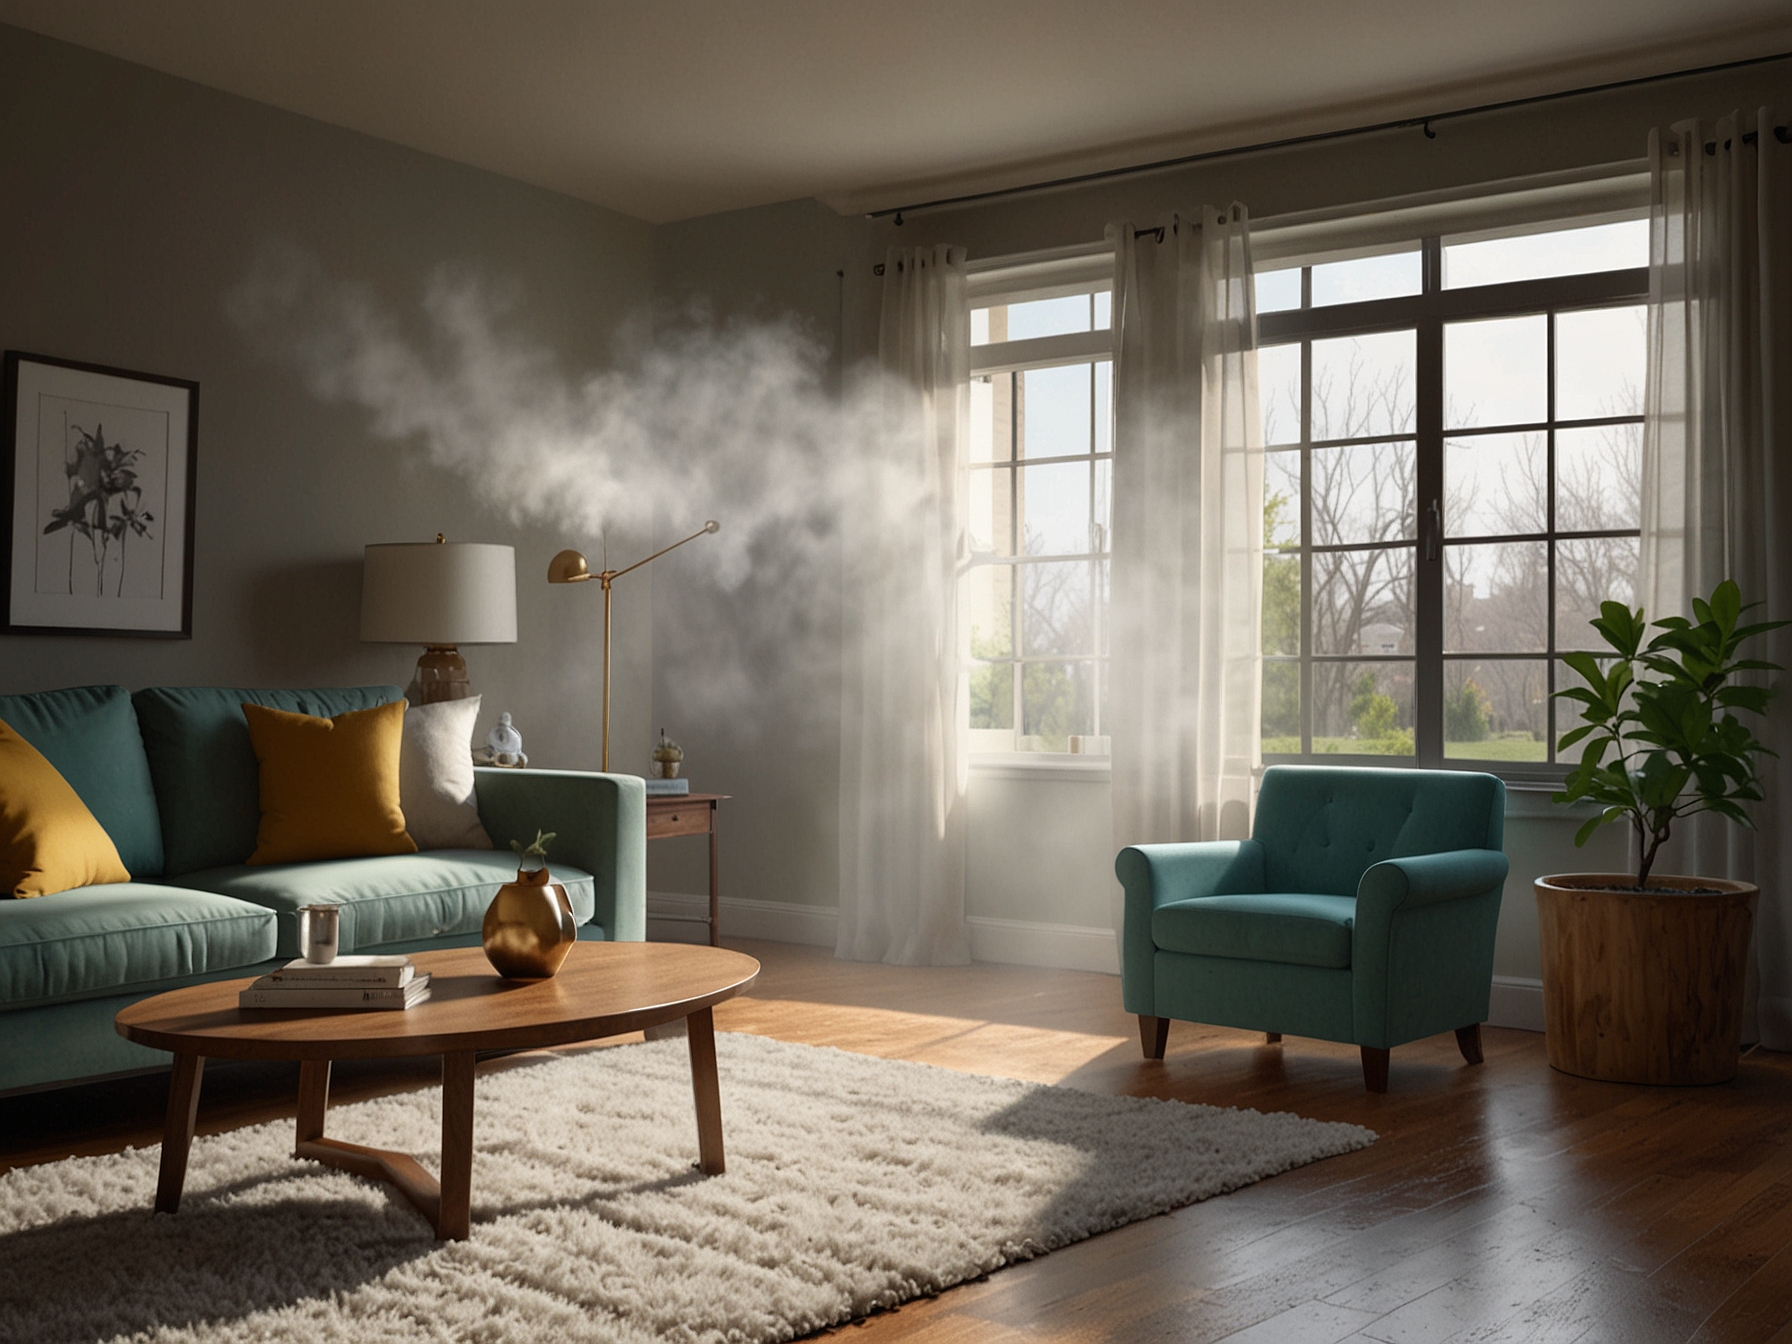 An image showcasing a full-room humidifier like the Honeywell HCM350W, placed in a spacious living room setting, demonstrating its effectiveness in providing clean mist throughout the room.